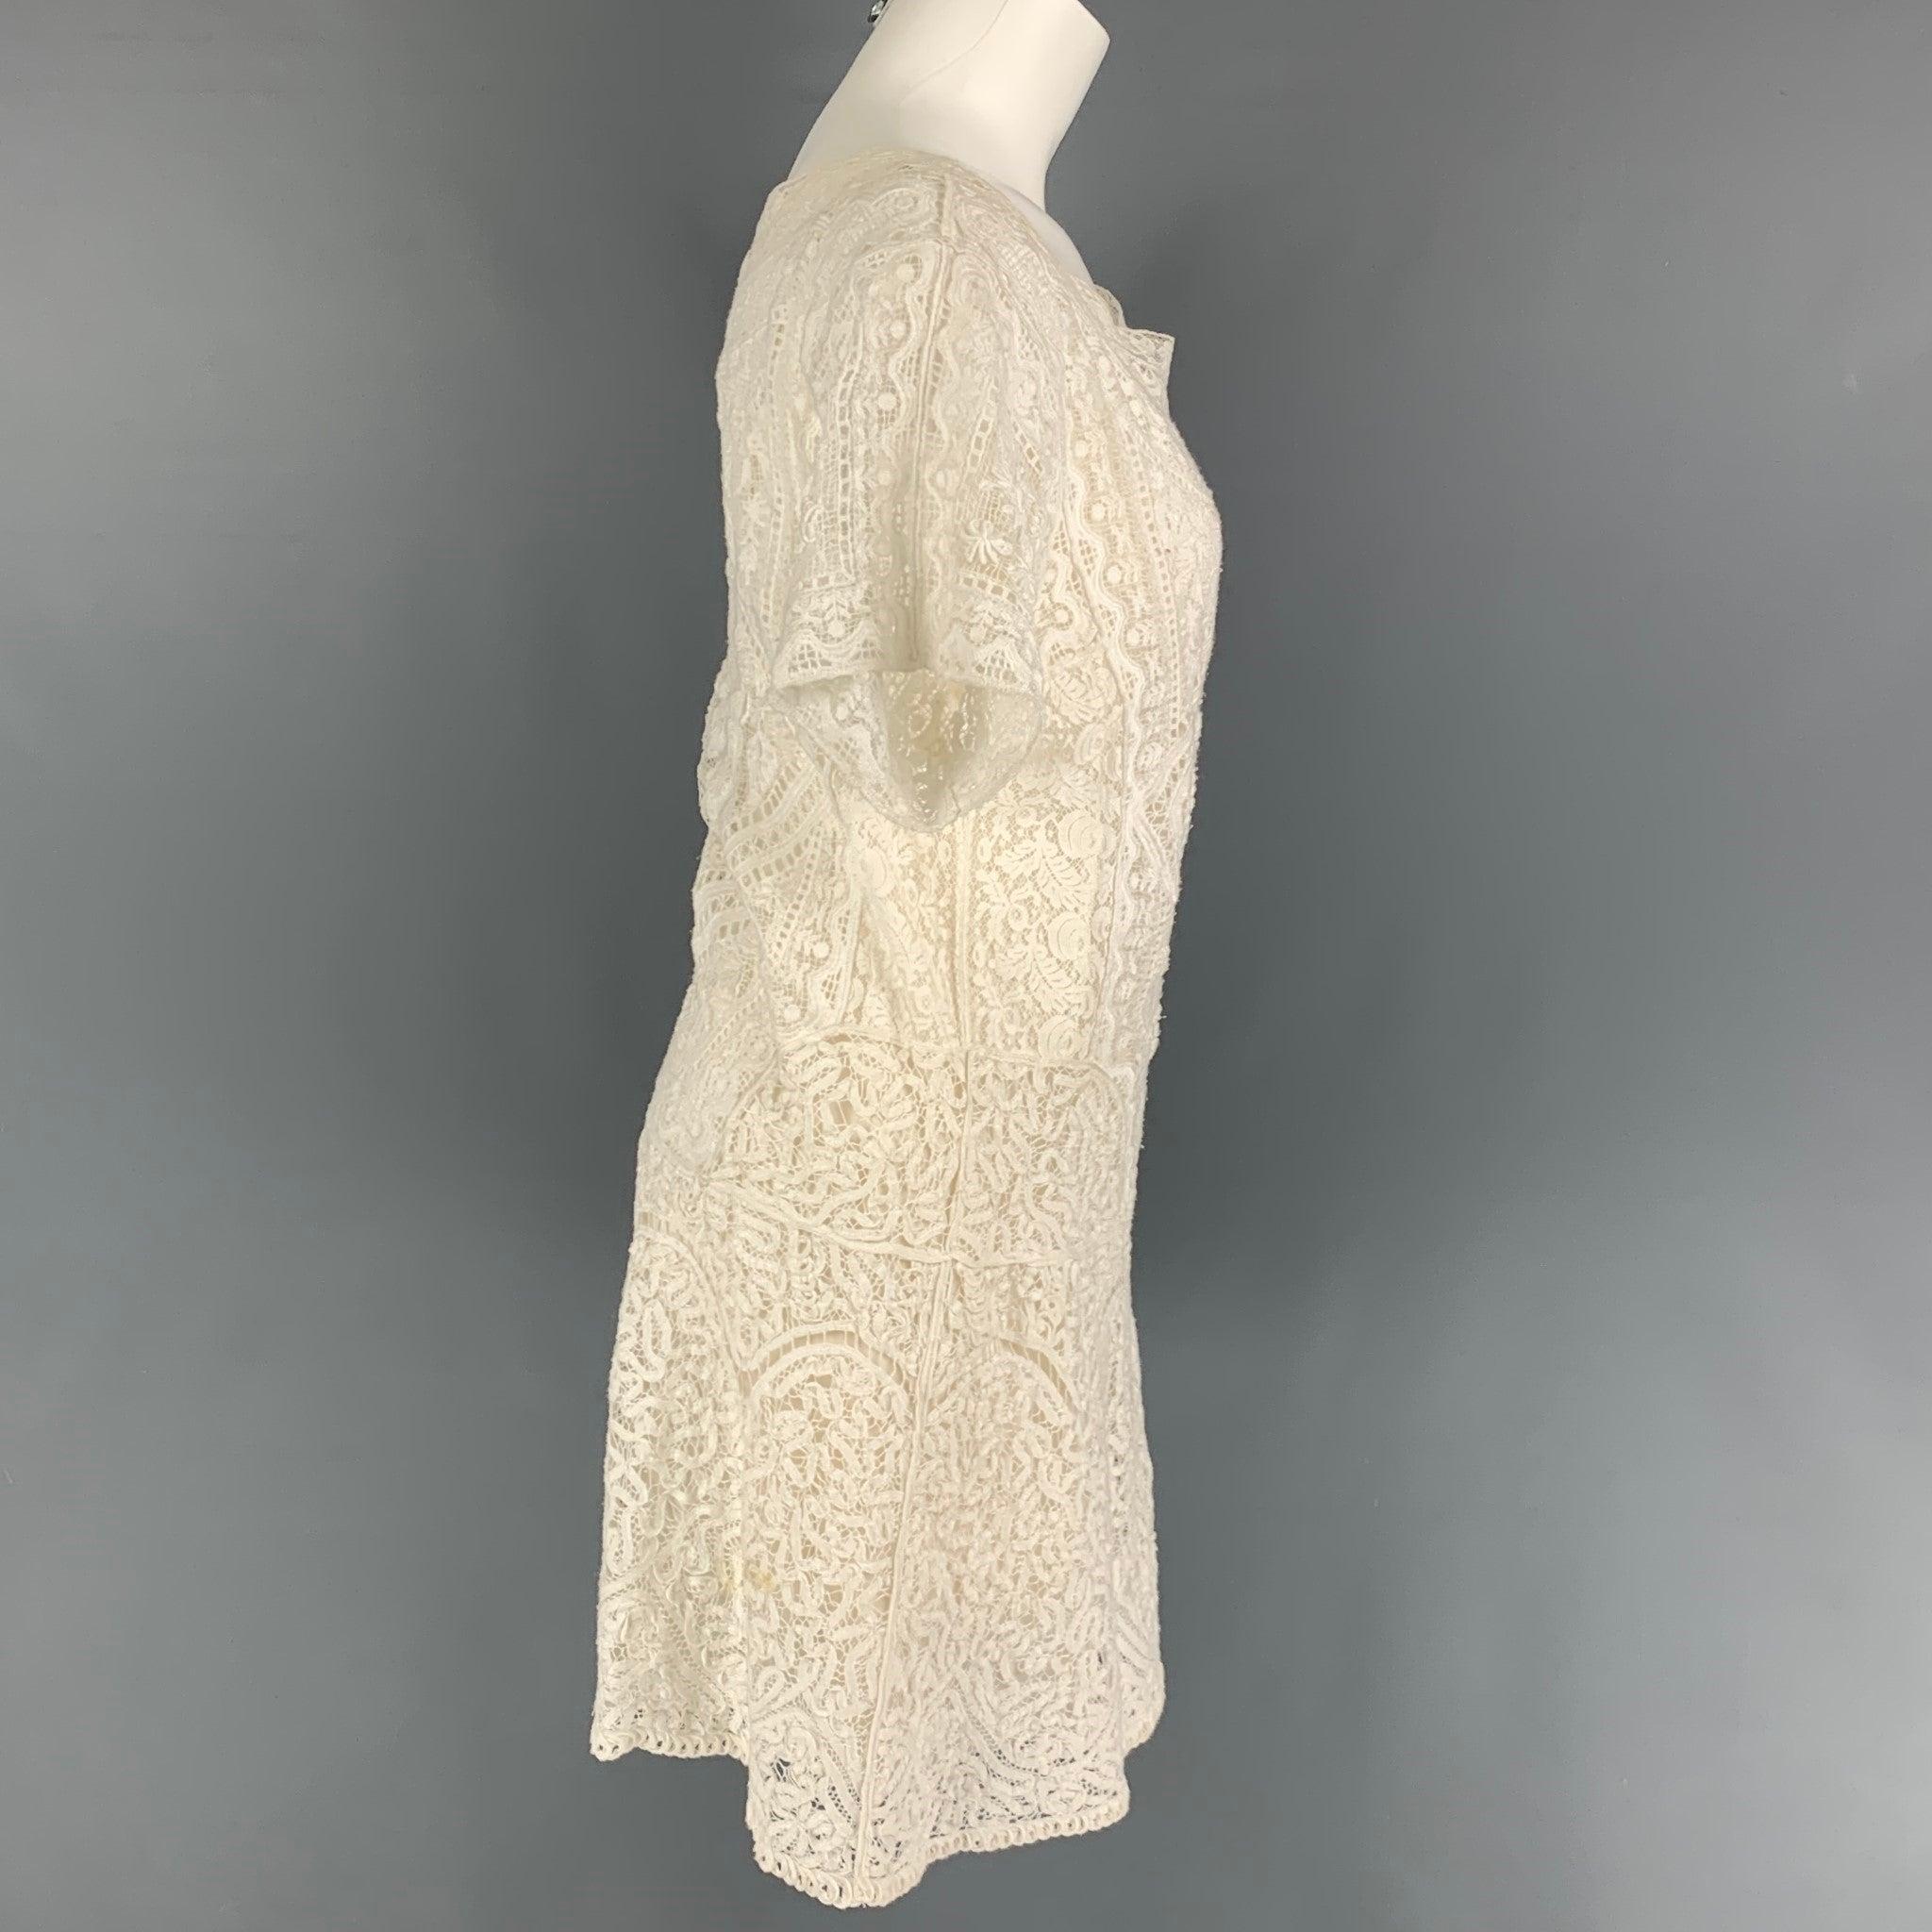 RALPH LAUREN Collection dress comes in a white crochet cotton with a slip liner featuring a shift style and a short sleeves.
Made in Italy. Very Good
Pre-Owned Condition.
Light wear. As-Is. Fabric tag removed.  

Marked:   M  

Measurements: 
